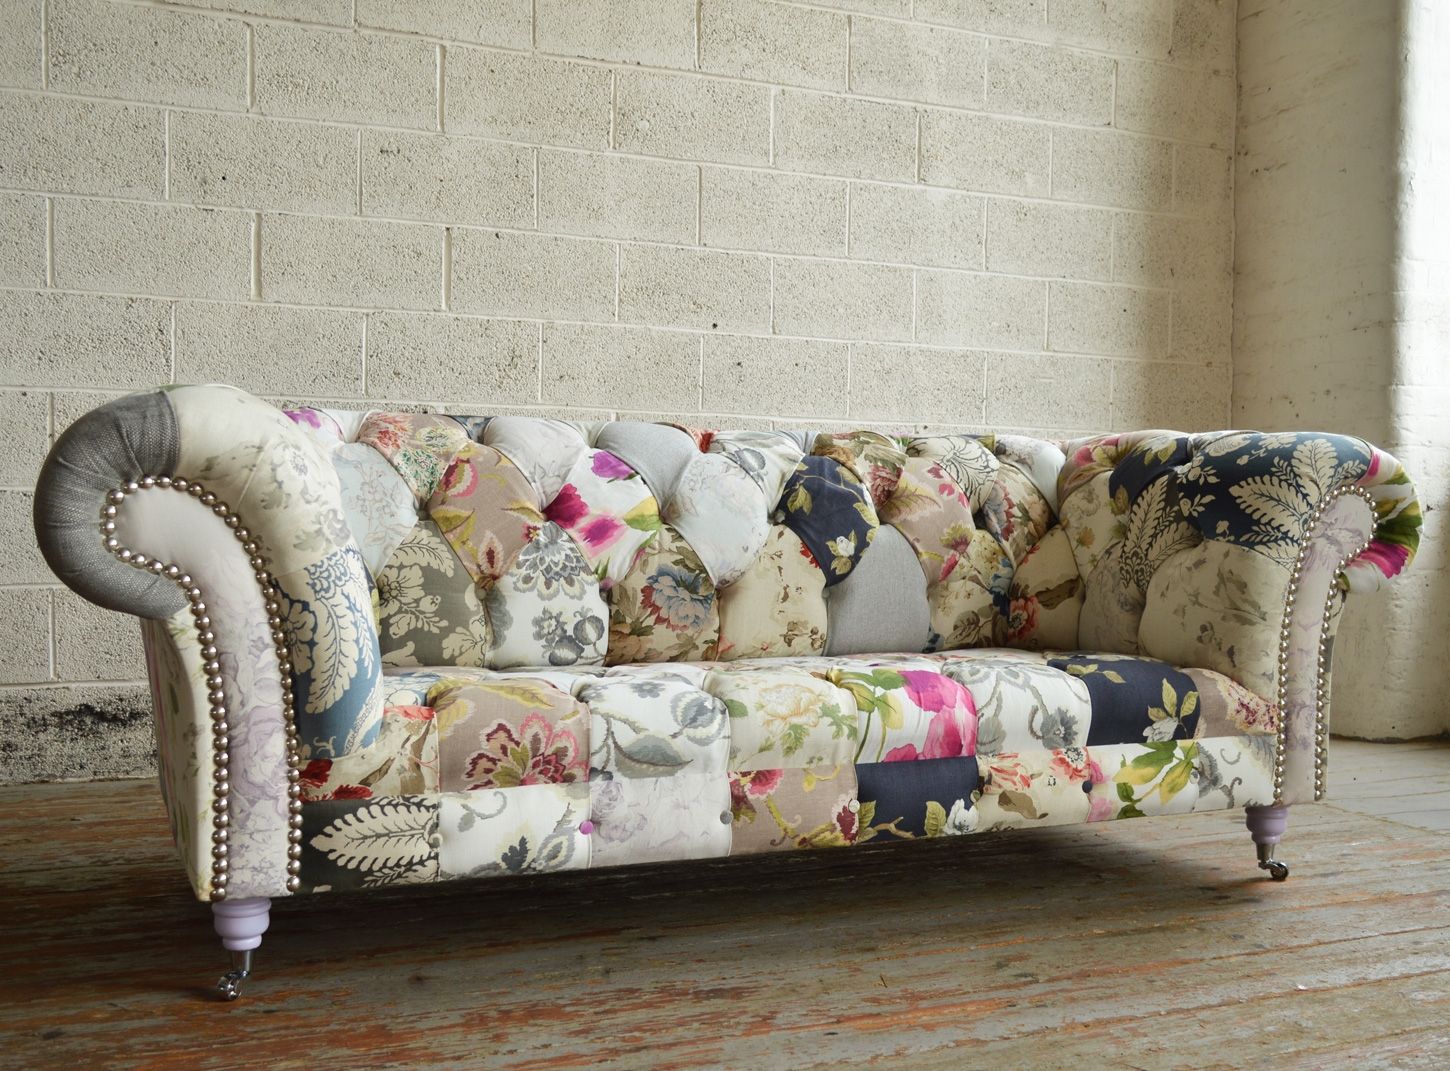 Handmade Vintage Grace Floral Patchwork Chesterfield Sofa Abode Within Chintz Sofas And Chairs (View 1 of 15)